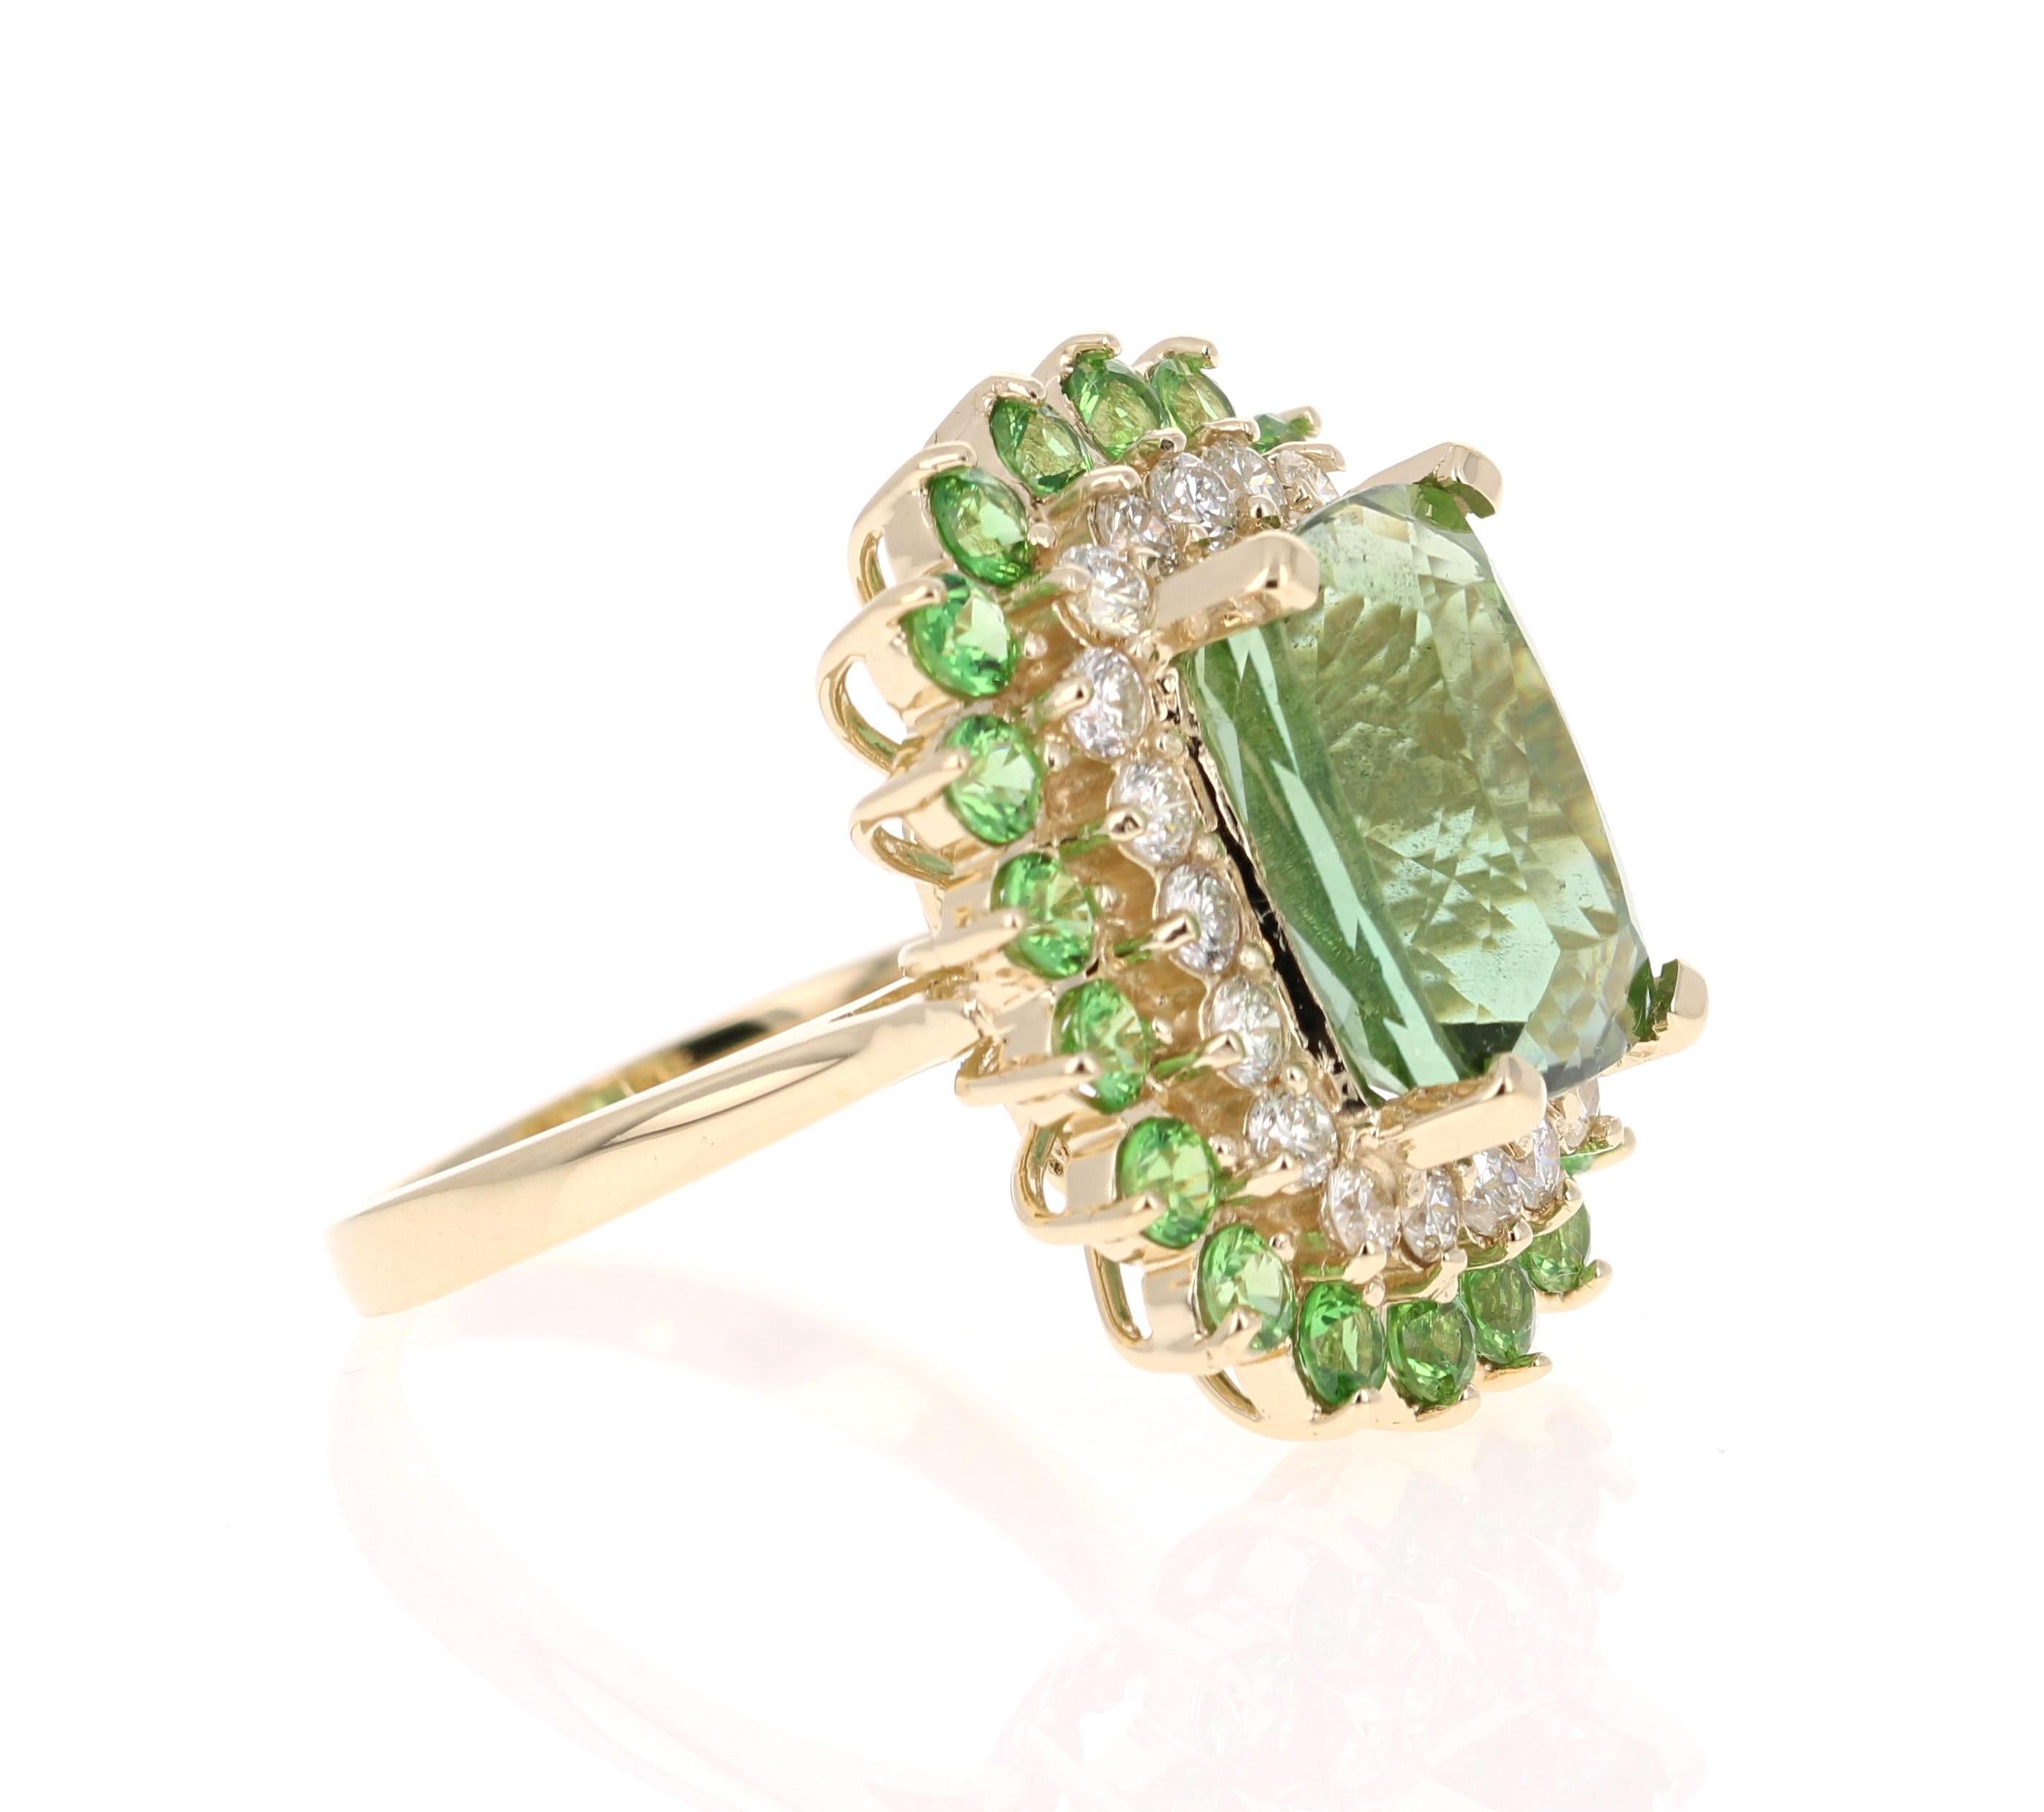 A unique beauty that is sure to be a rare and gorgeous design! 

This stunner has a gorgeous Rectangular/Cushion Cut leafy Green Tourmaline that weighs 7.90 Carats. Surrounding the Tourmaline are 20 Round Cut Diamonds that weigh 0.90 Carats with a